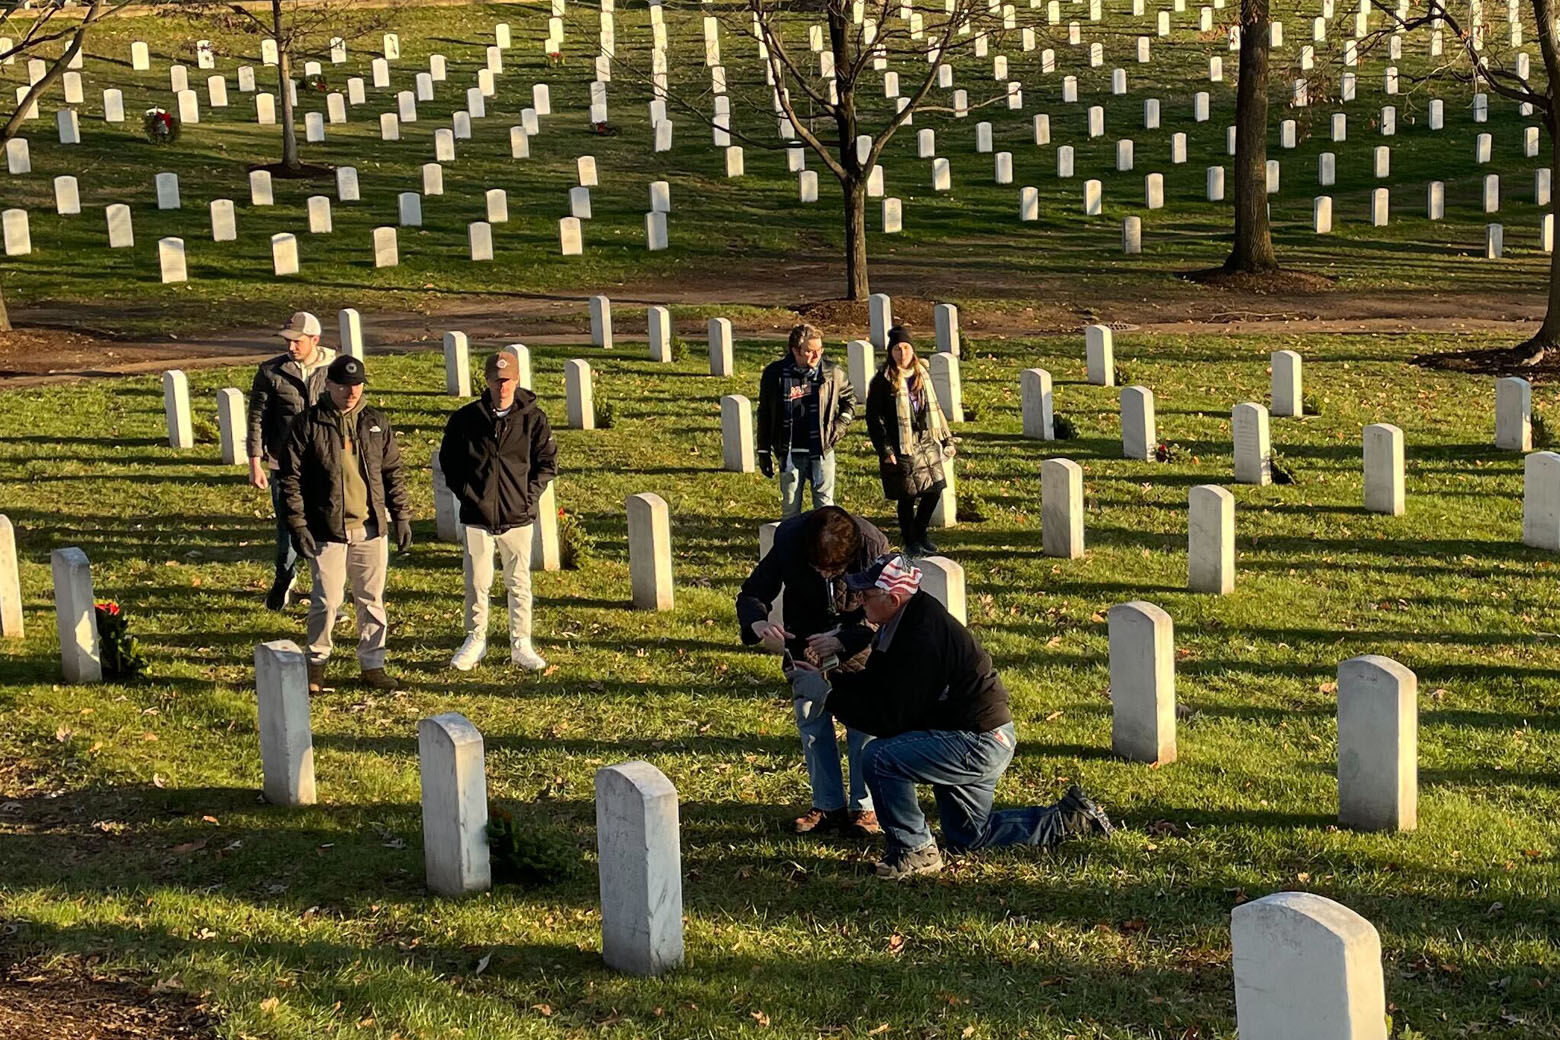 Volunteers planned to place wreaths on more than 260,000 headstones at Arlington National Cemetery on Dec. 17, 2022.